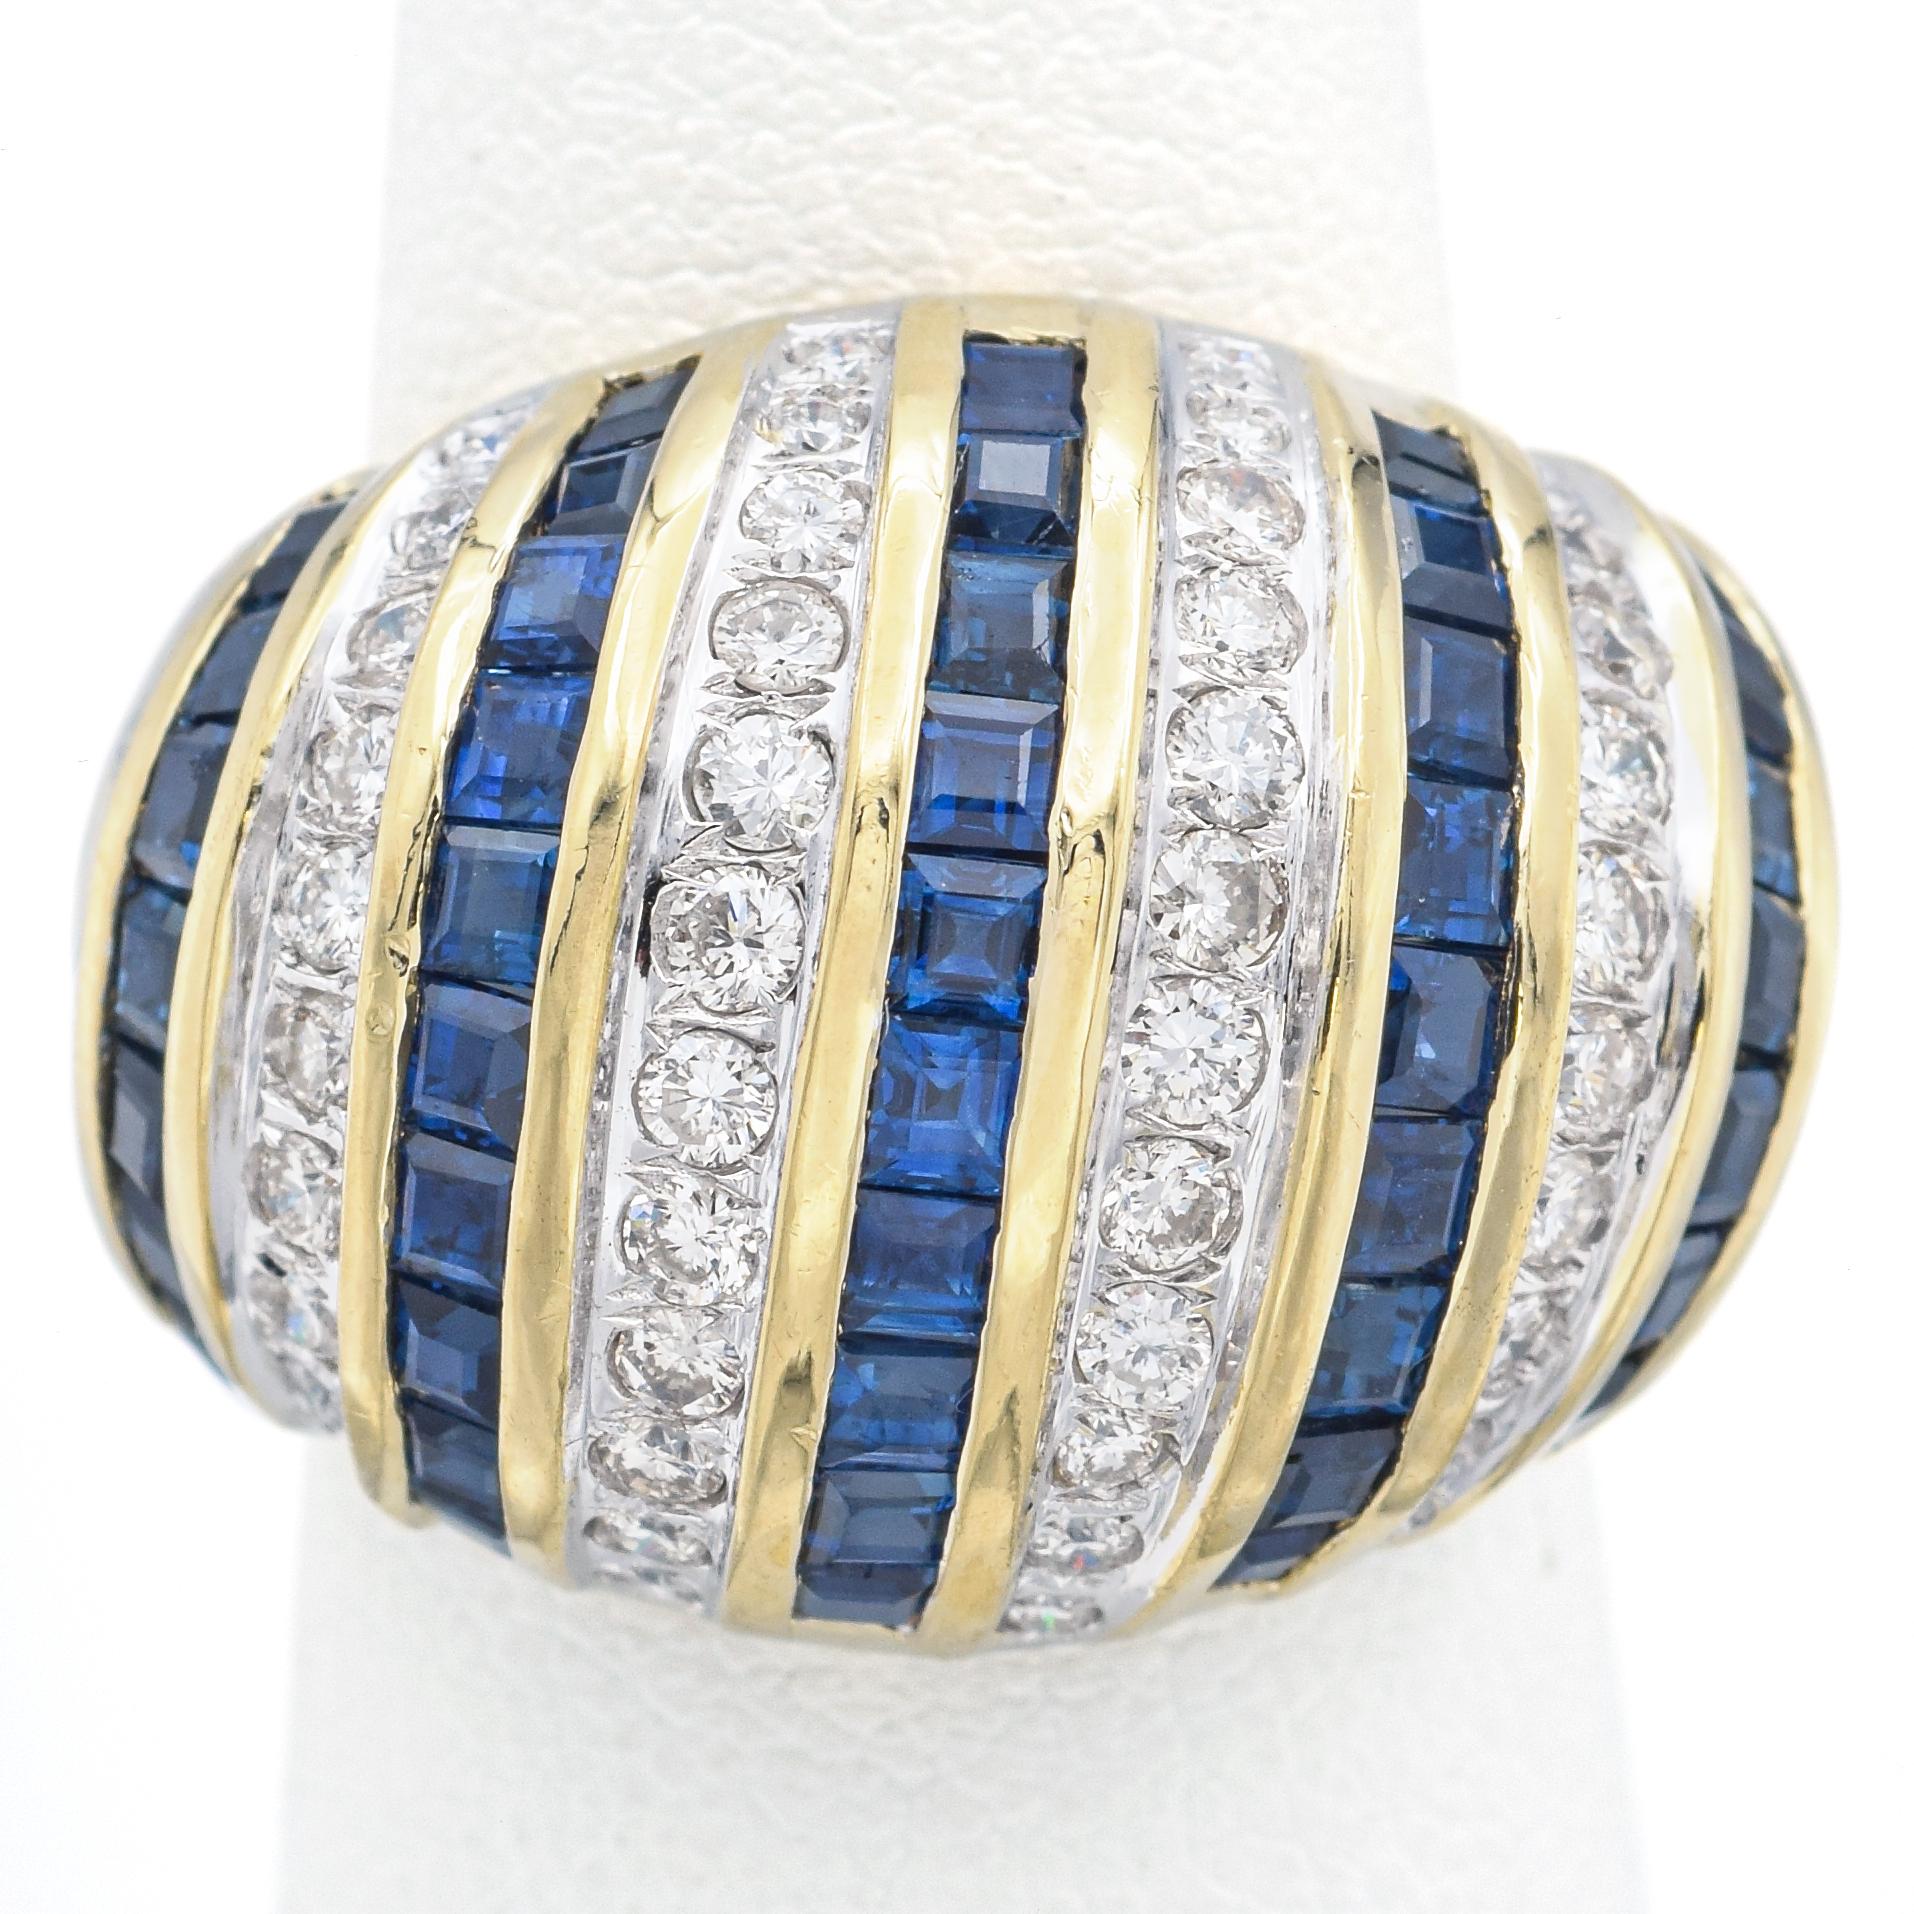 Weight: 10.9 Grams
Stone: Sapphire (2-2.25 mm) & Approx 1.28 TCW (0.01-0.03 ct) Diamond
Face of Ring: 23.0 x 17.5 x 8.6 mm
Ring Size: 5
Hallmark: 750 JJ

Item #: BR-1071-101323-09